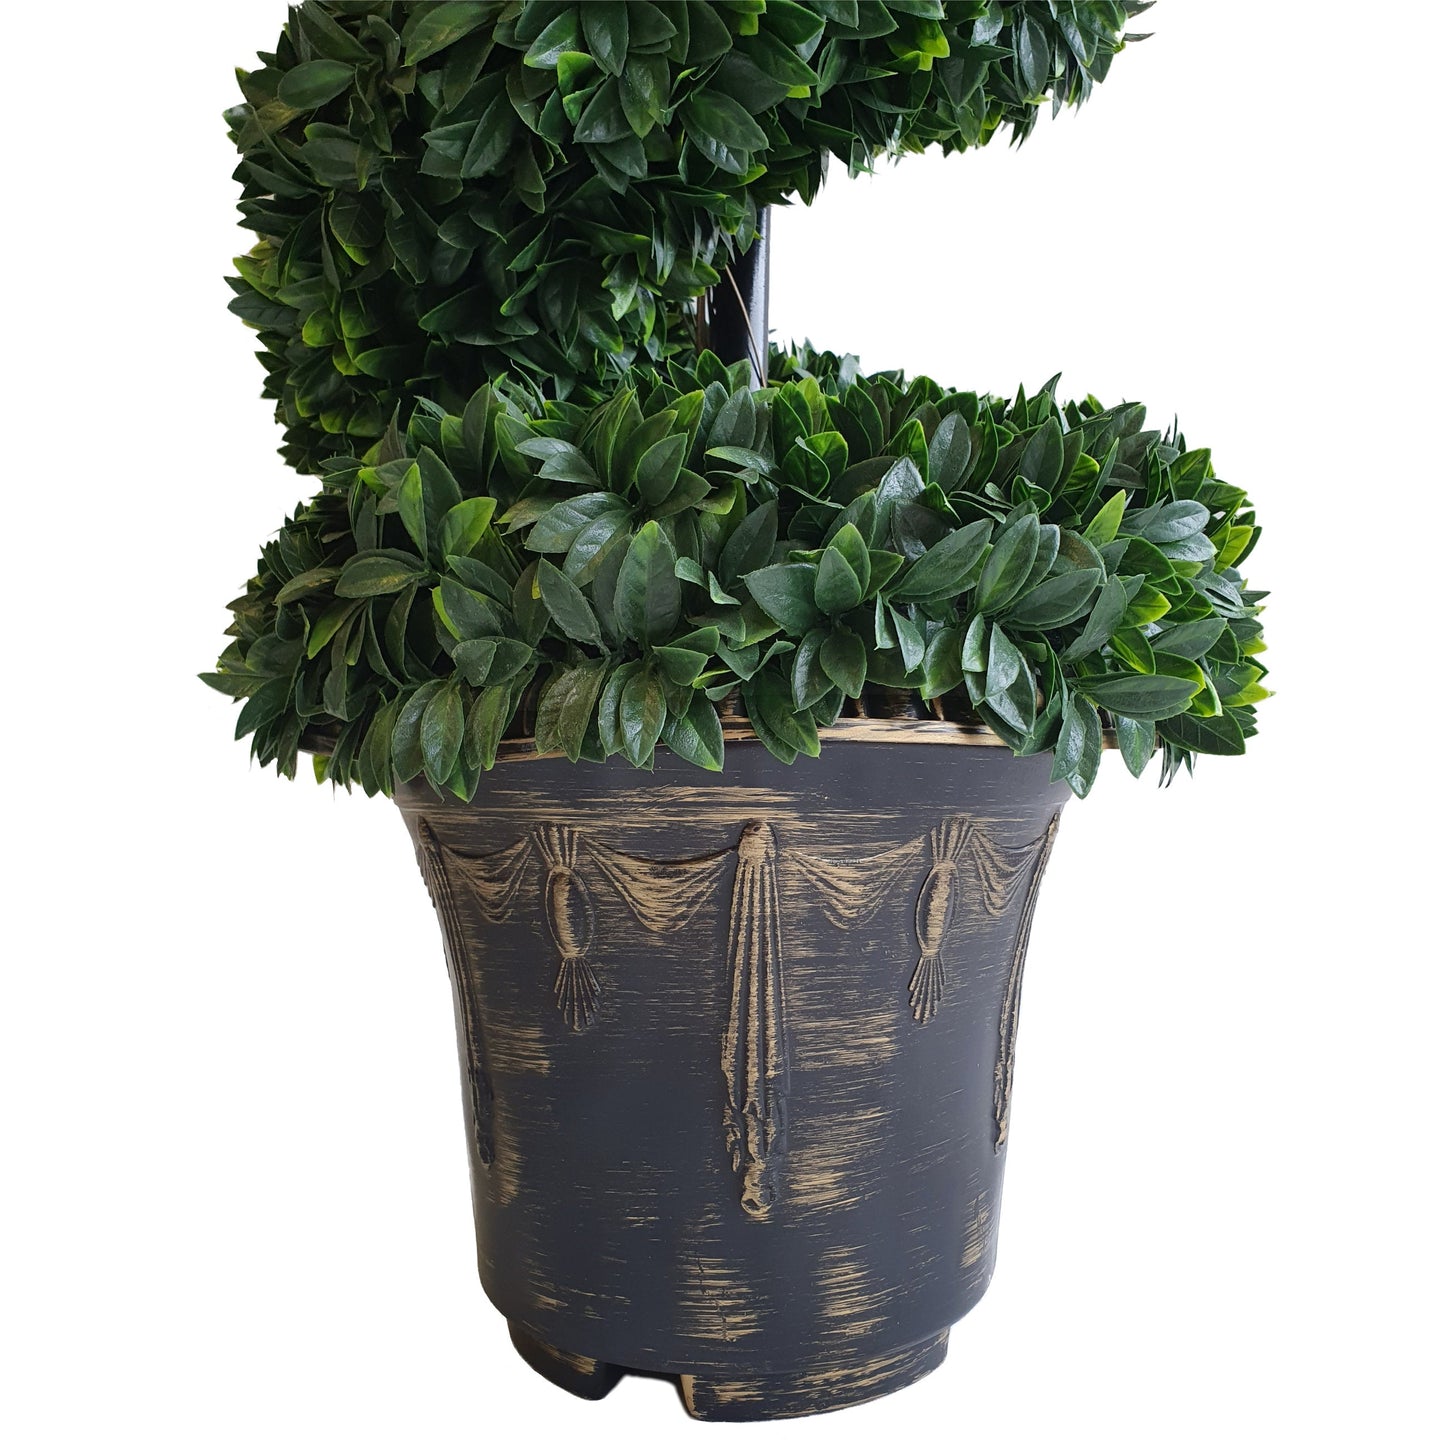 Spiral Large Leaf Boxwood Topiary Tree with Decorative Planter 90cm